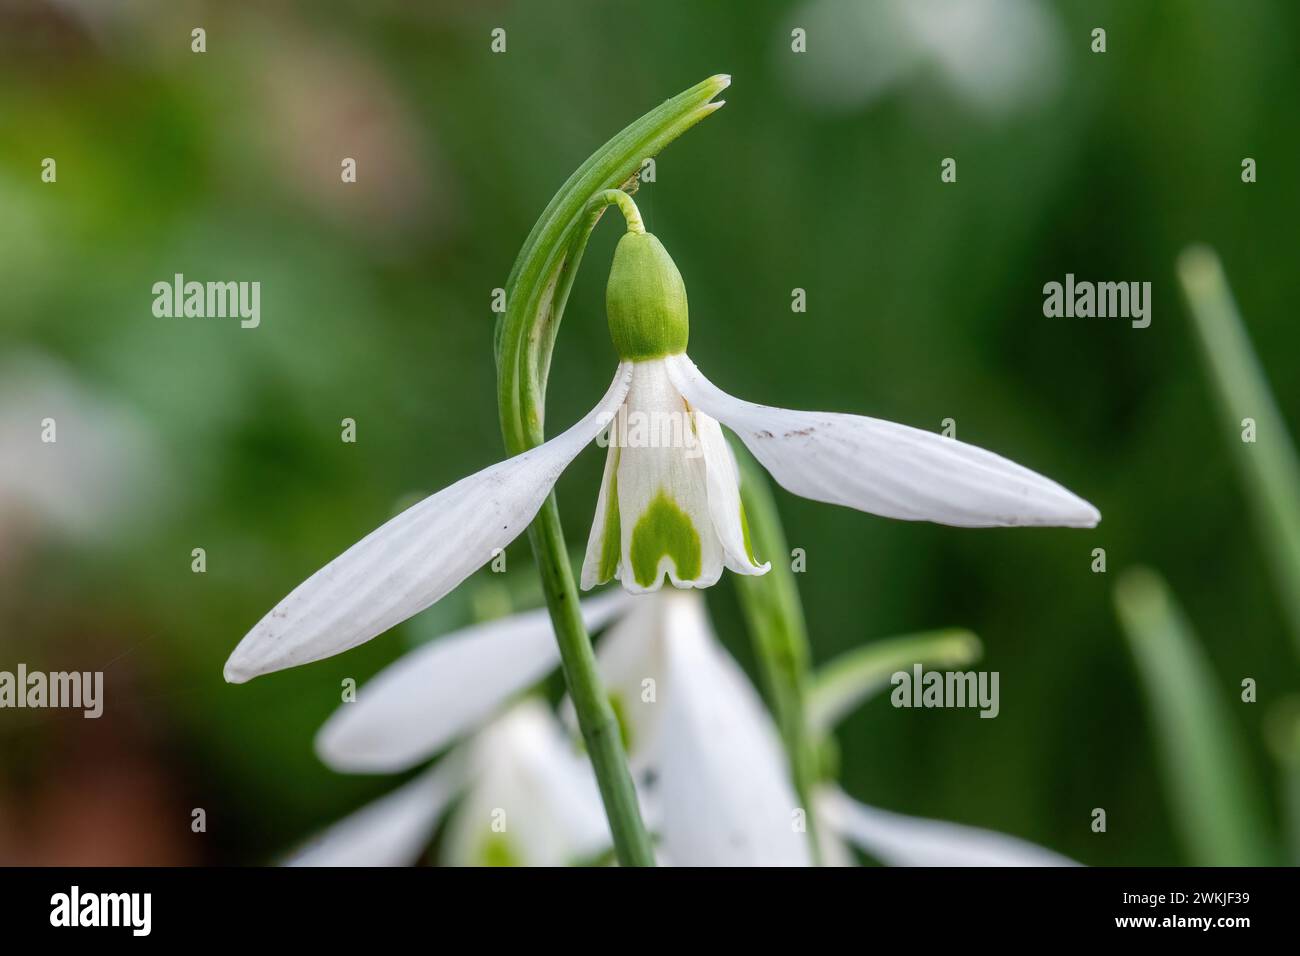 Galanthus nivalis 'James Backhouse' snowdrop variety flowering in a garden during February, England, UK Stock Photo